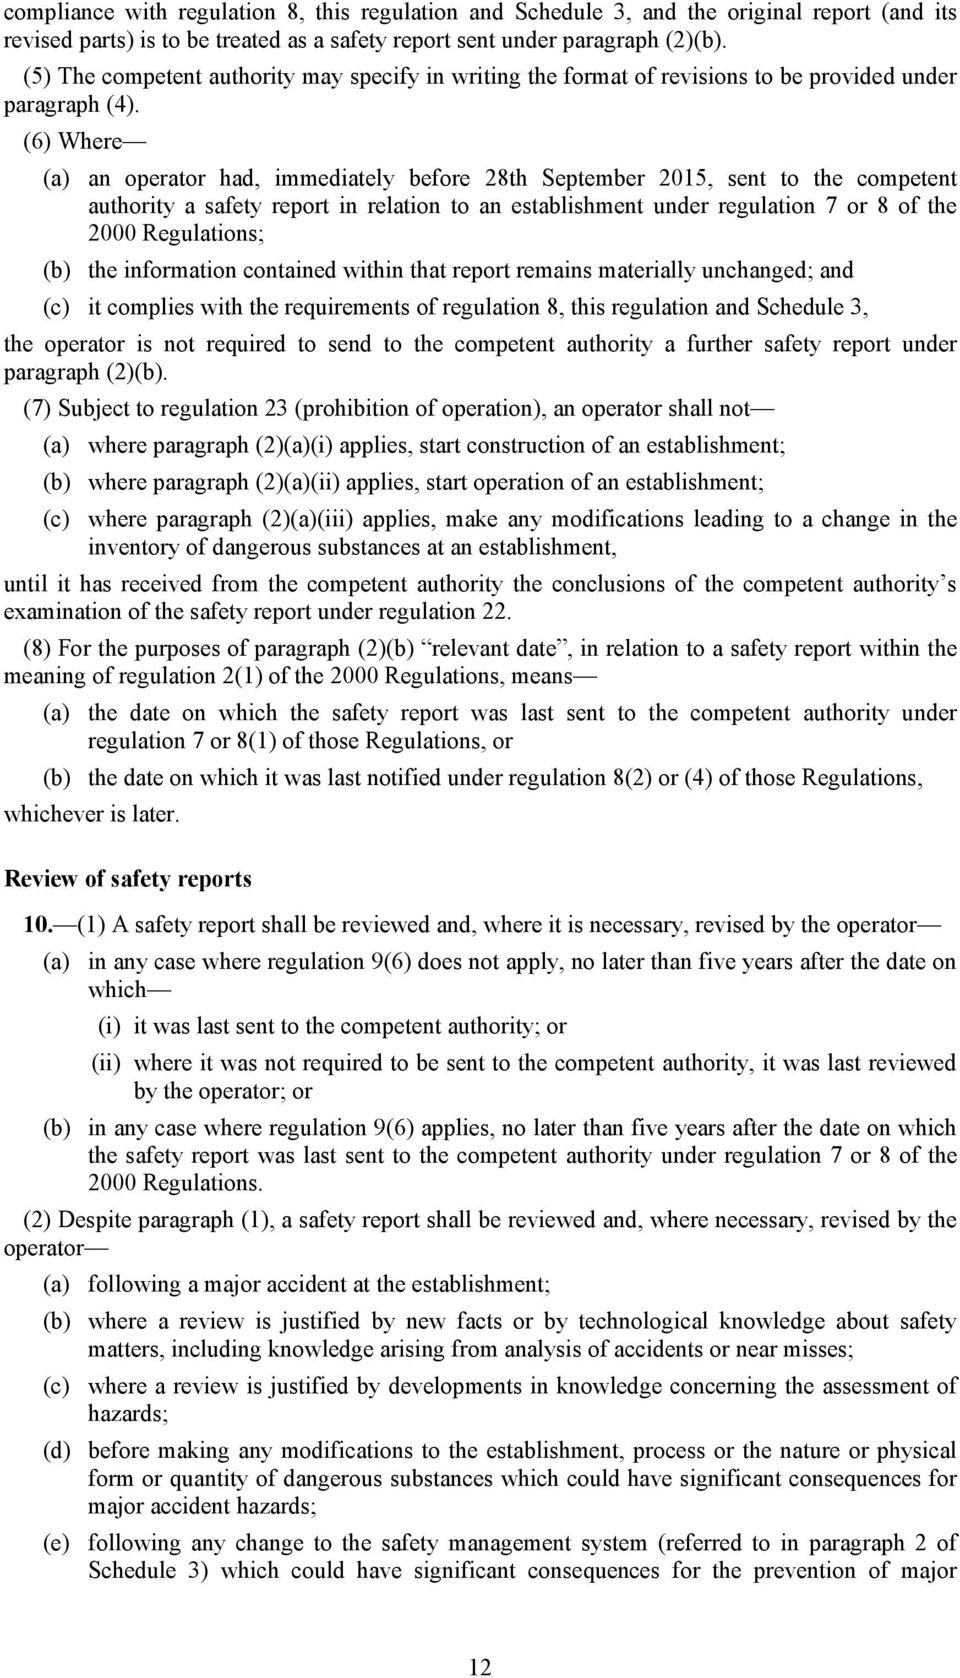 (6) Where (a) an operator had, immediately before 28th September 2015, sent to the competent authority a safety report in relation to an establishment under regulation 7 or 8 of the 2000 Regulations;